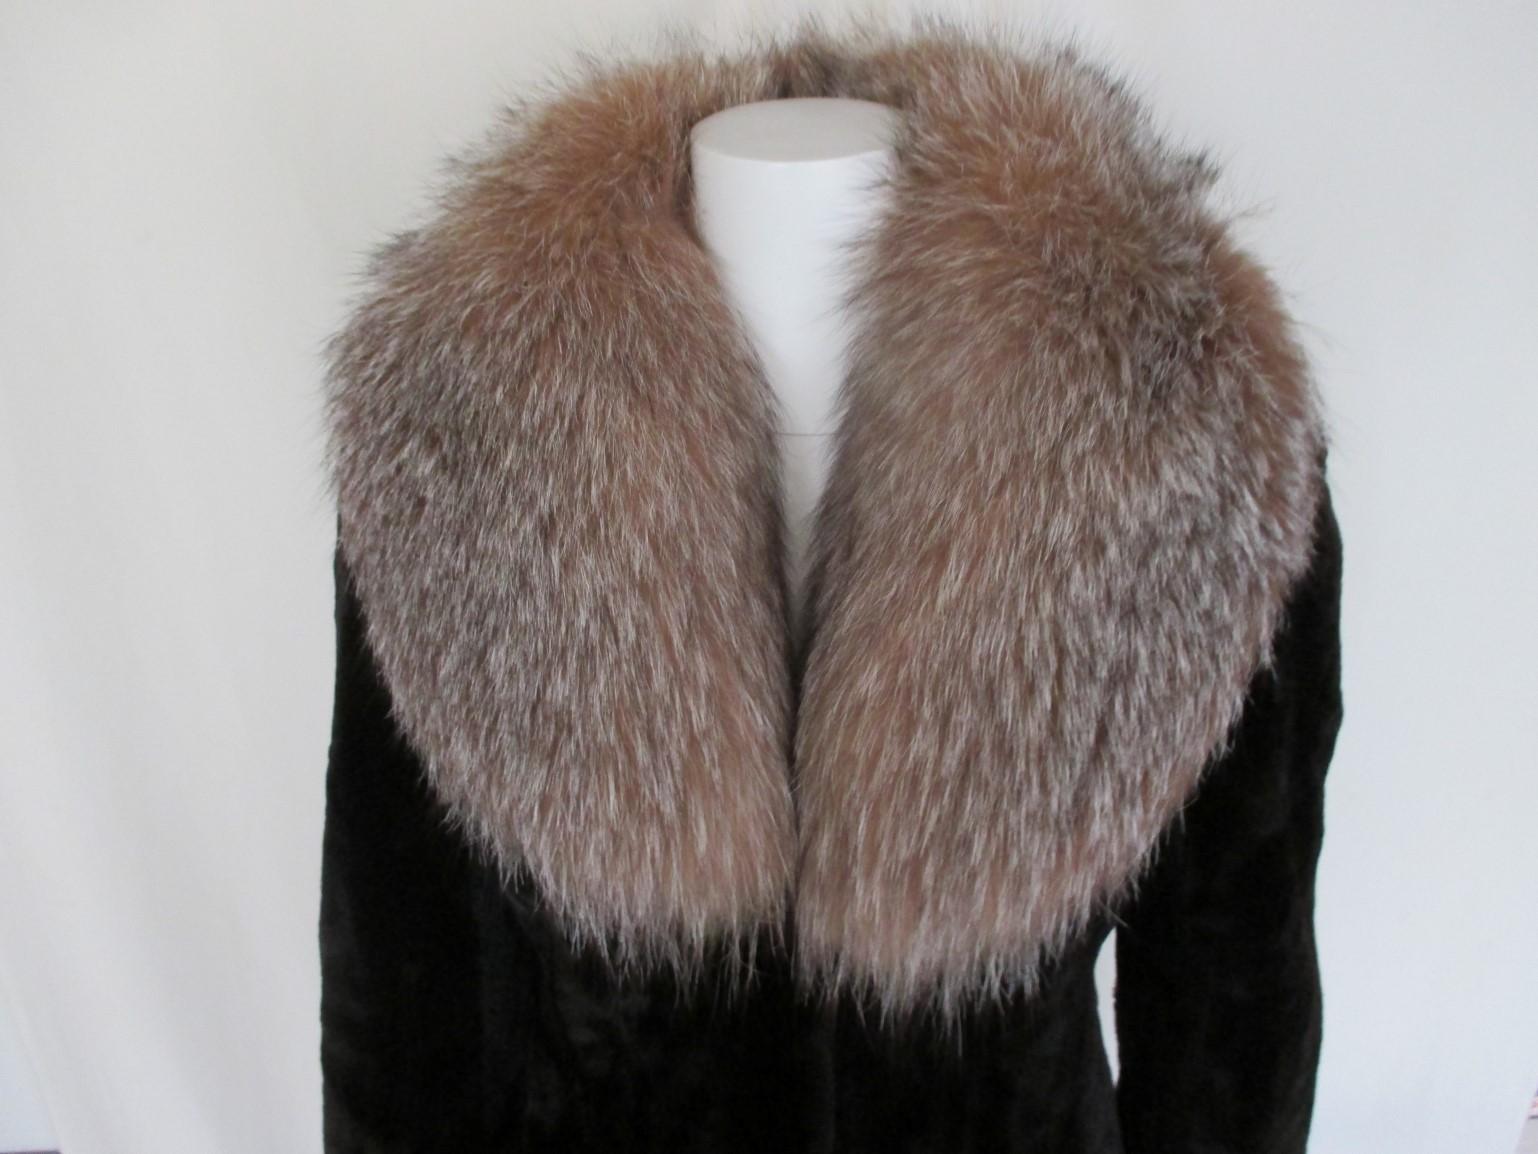 This vintage coat is made of sheared beaver with a fur collar and is embroidered at the sleeves and back.

We offer more exclusive fur items, see our frontstore.

Details:
It has 2 leather trimmed pockets and 3 closing hooks.
the coat is supple and